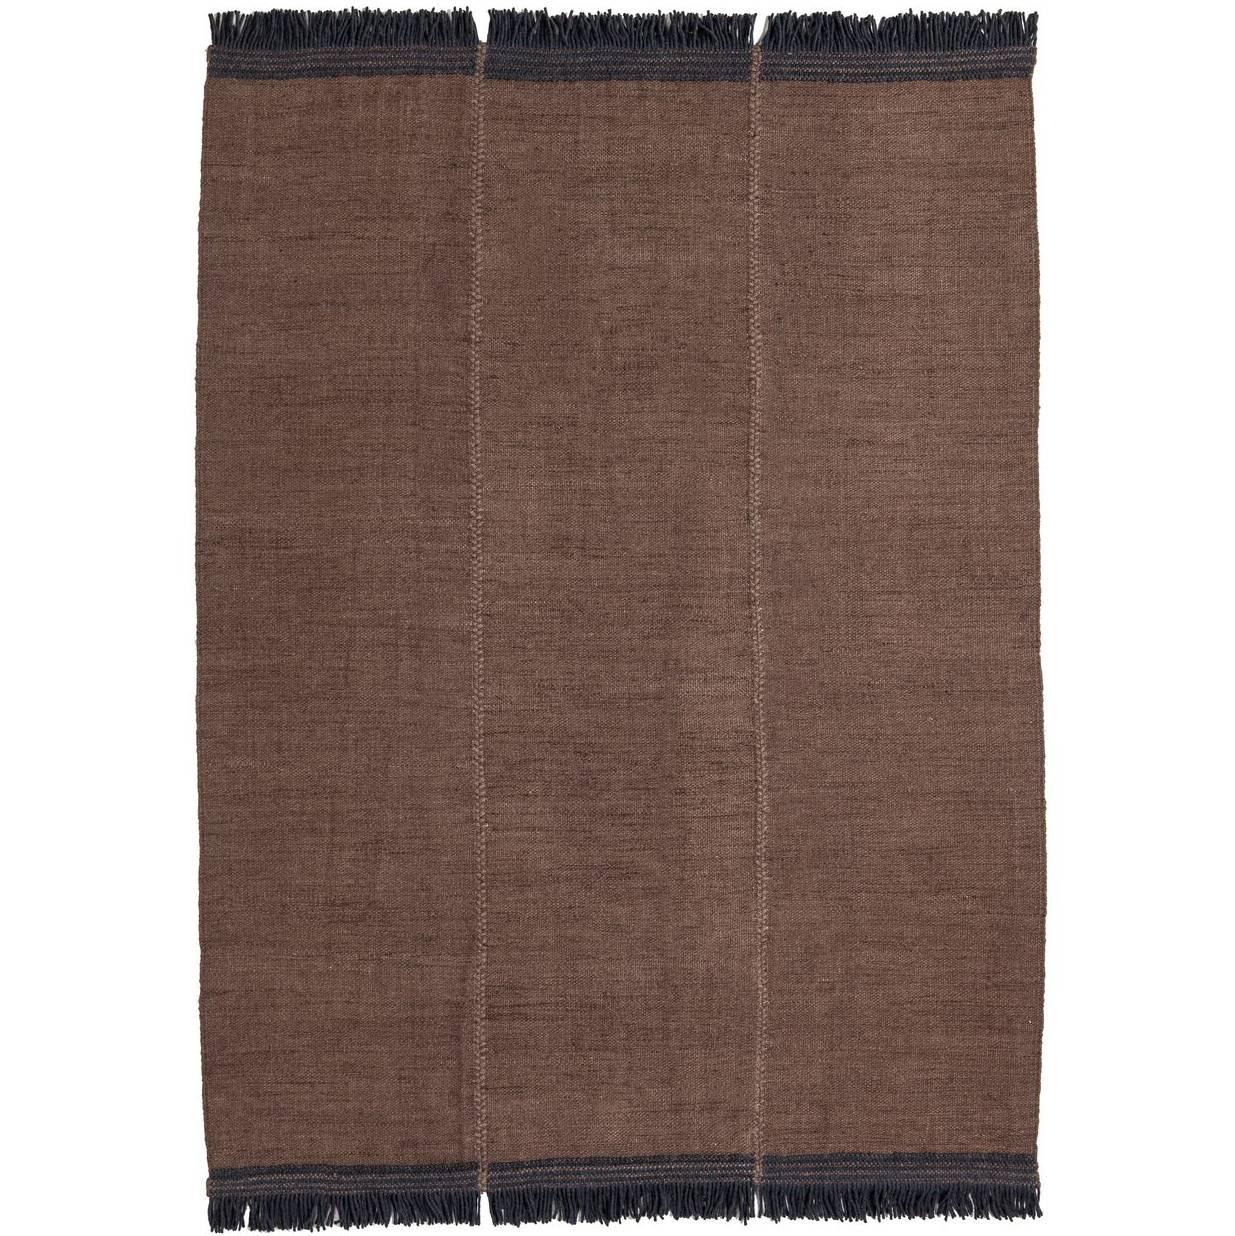 Mia Brown Hand-Loomed Wool Dhurrie Rug by Nani Marquina, Small